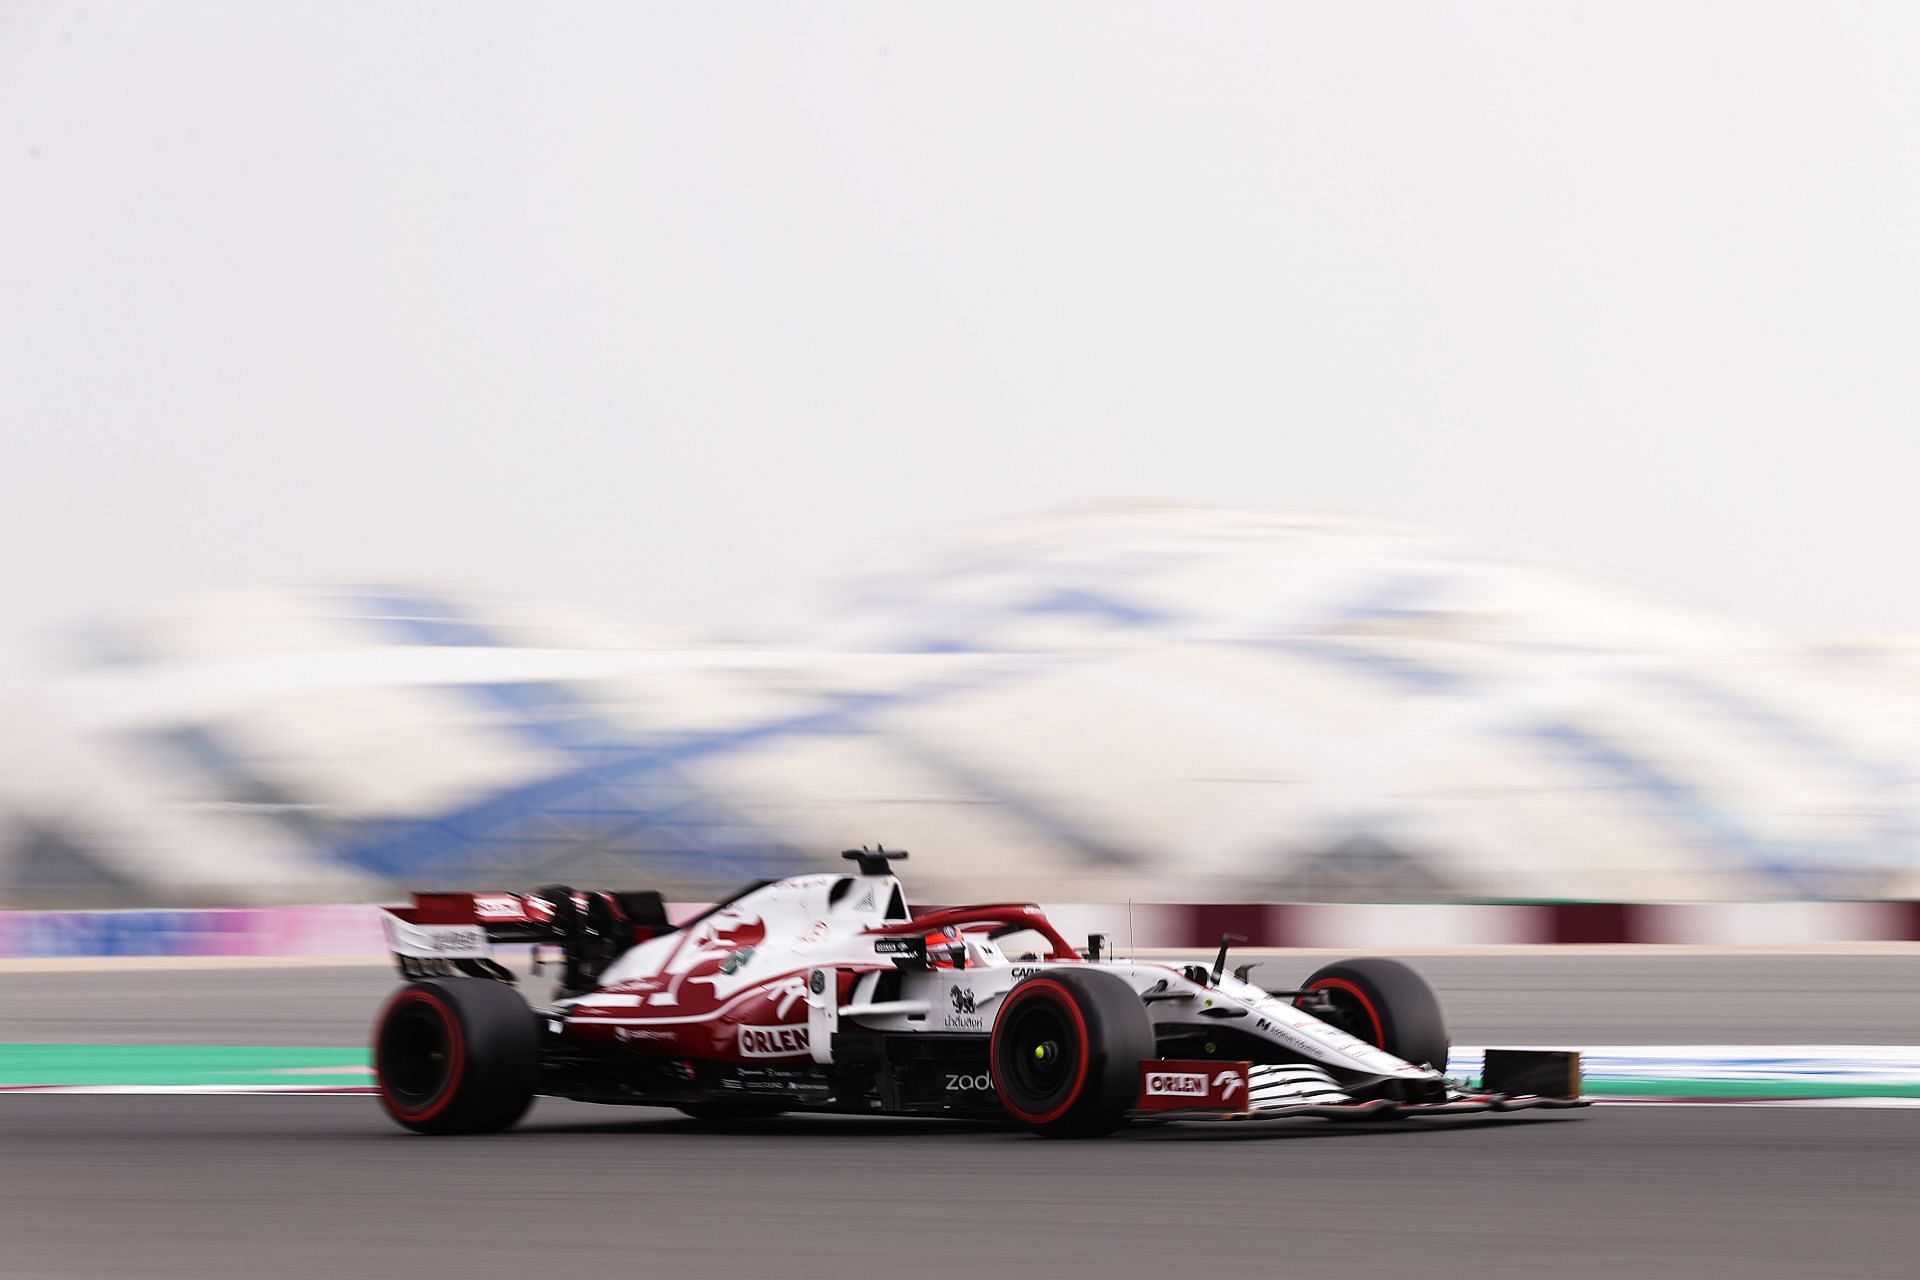 Kimi Raikkonen in action at the 2021 Qatar Grand Prix (Photo by Lars Baron/Getty Images)